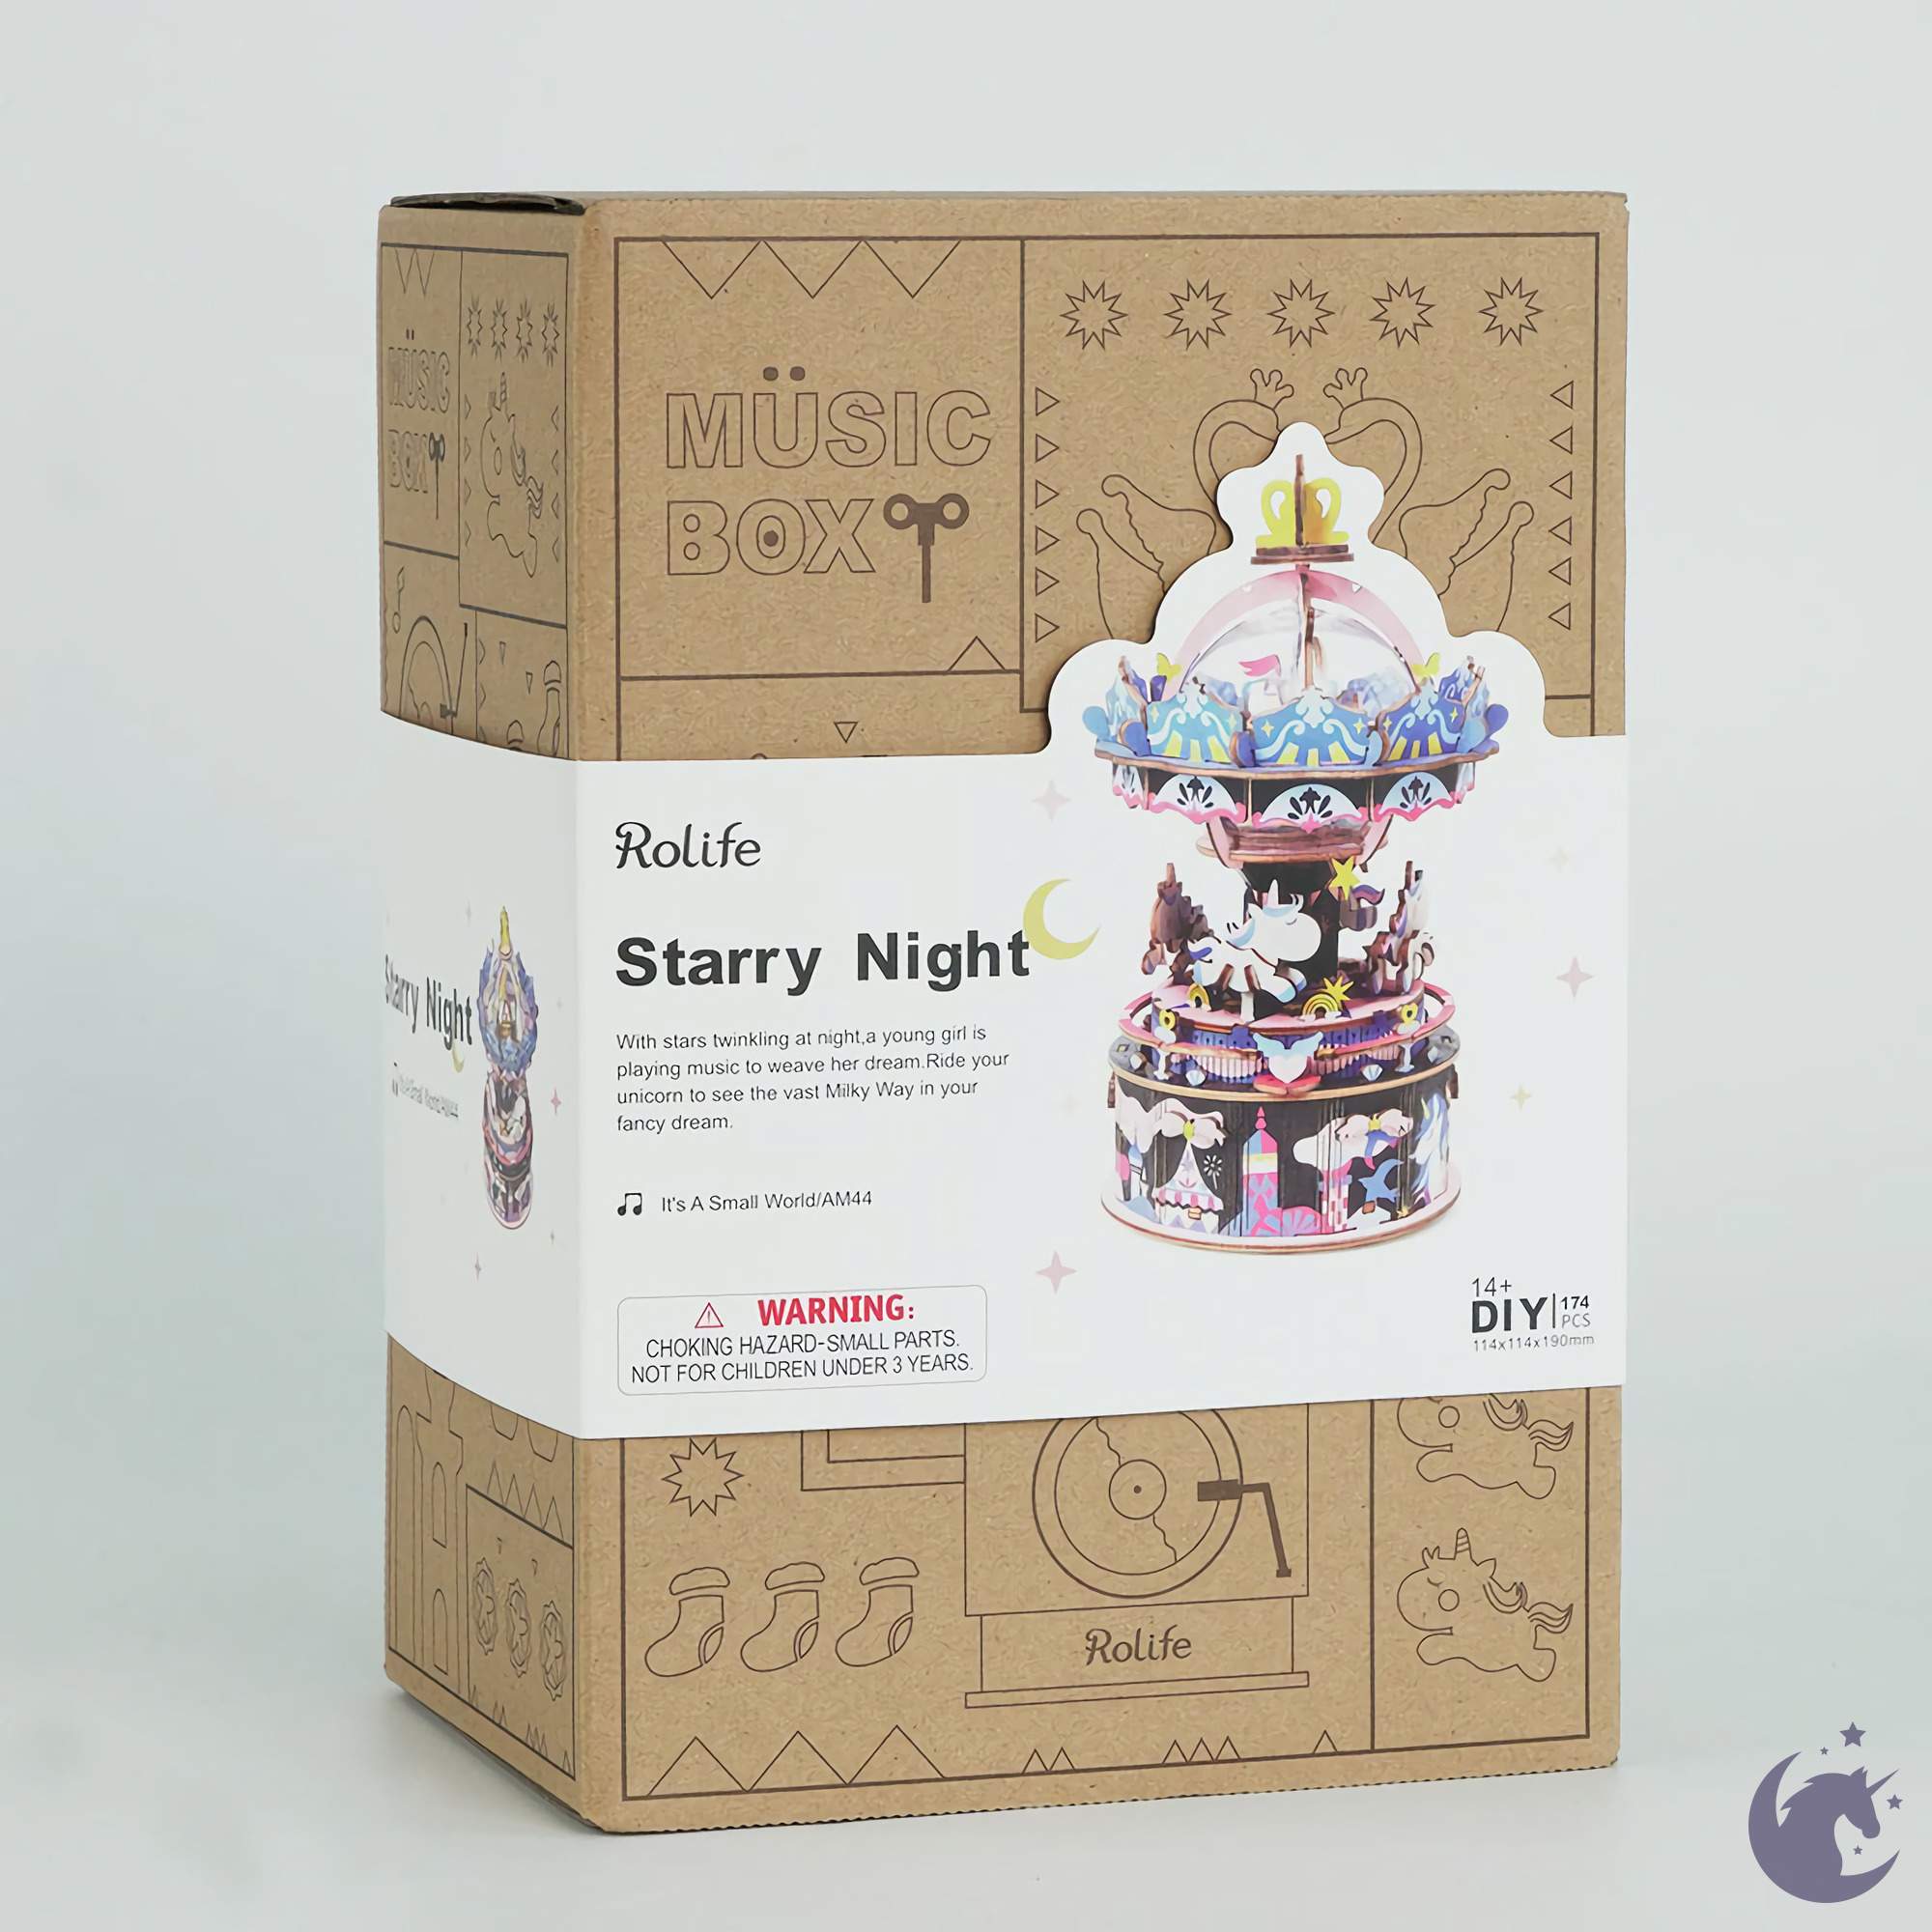 playwithunicorn_diy_robotime_rolife_am_44_starry_night_educational_craft_kit_wooden_puzzle_toys_0_870a2841-3eb5-4cdf-bed9-aa07bb620863.jpg